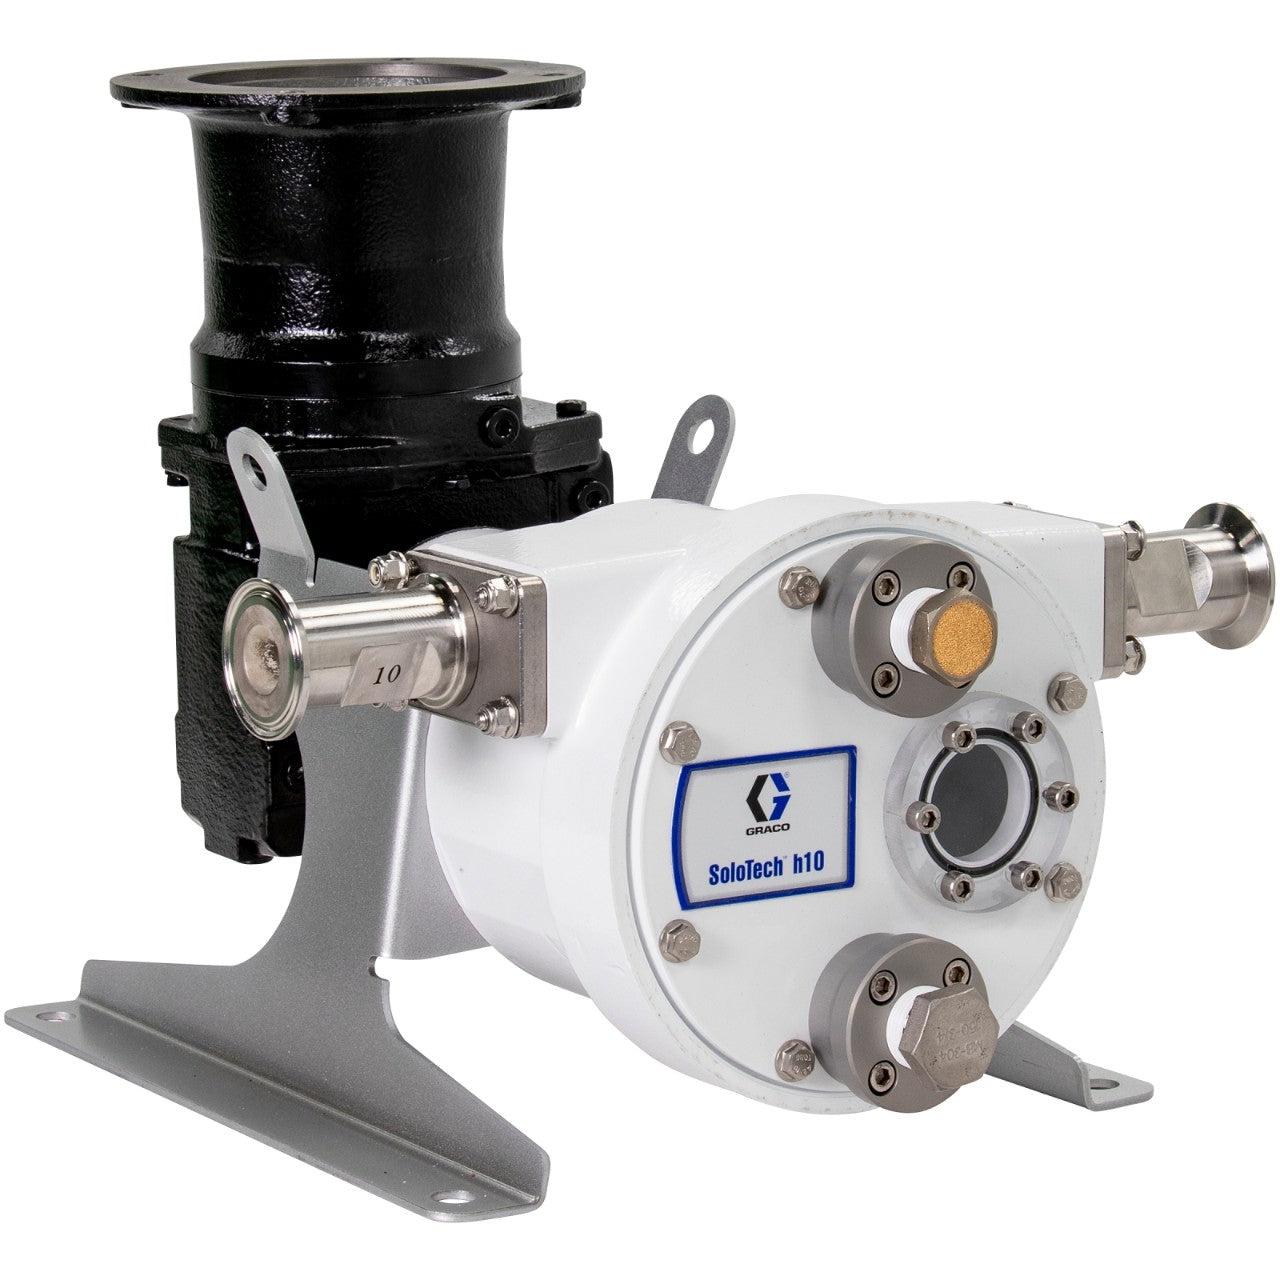 SoloTechª h10 Peristaltic Pump, Low-speed gear reducer no motor, IEC, FDA Nitrile Hose, SST Sanitary Clamp Barb